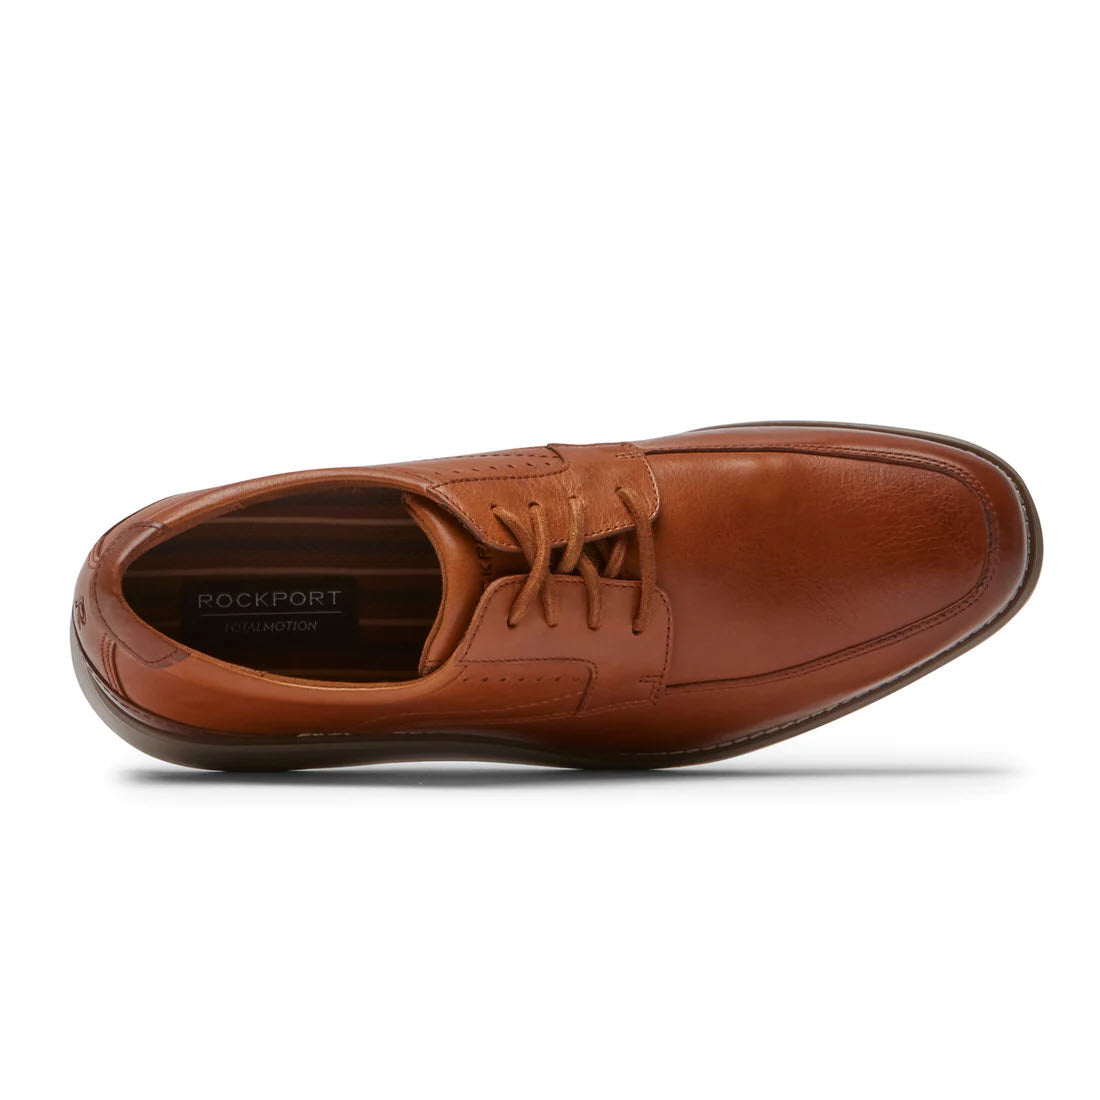 A single cognac leather Rockport Total Motion Craft apron toe oxford isolated on a white background, viewed from a top angle.